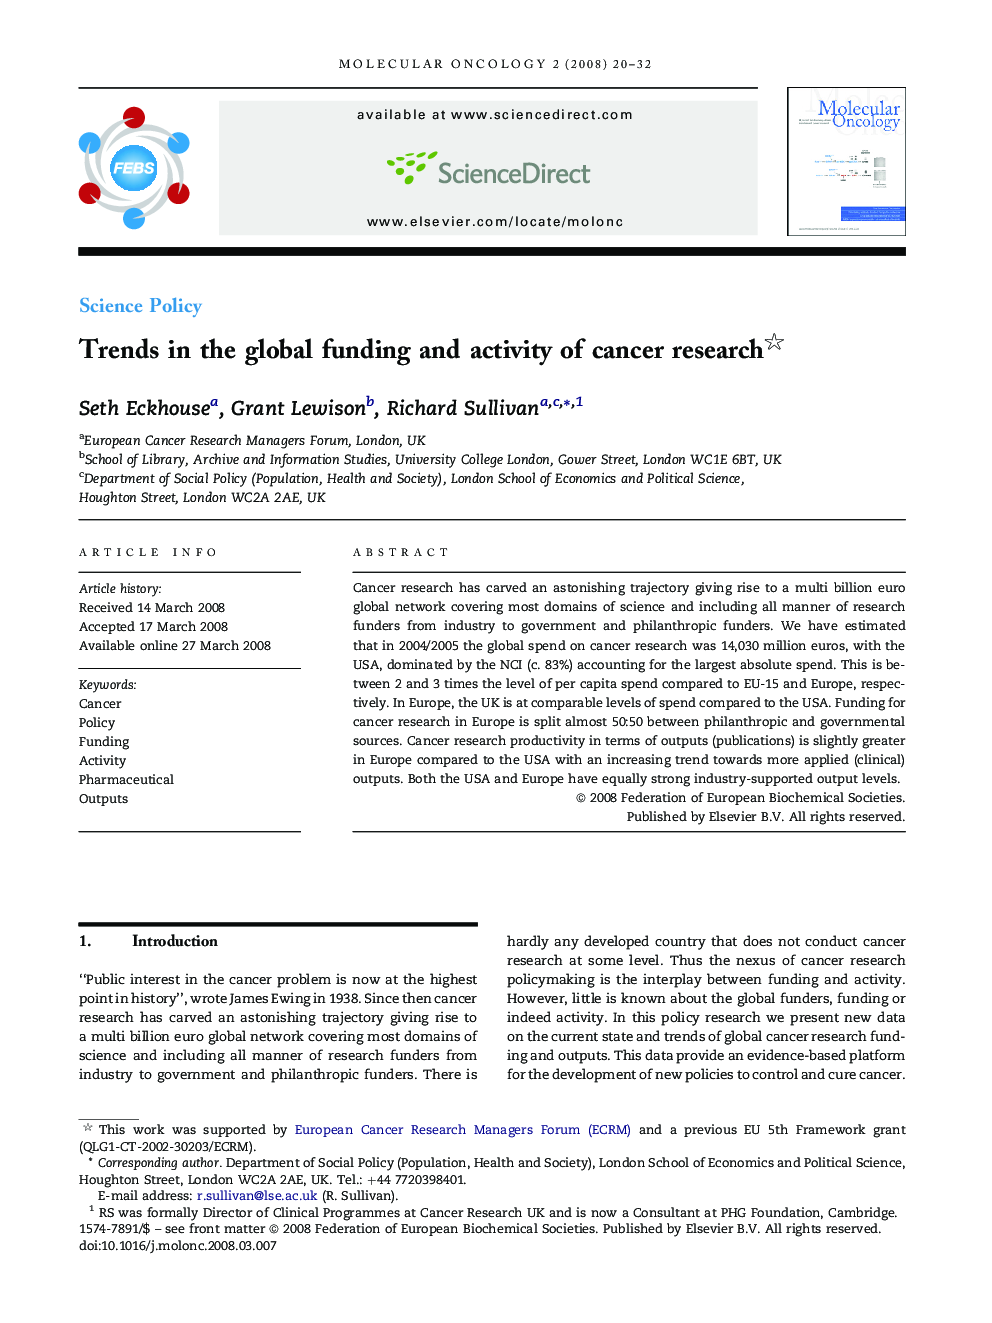 Trends in the global funding and activity of cancer research 